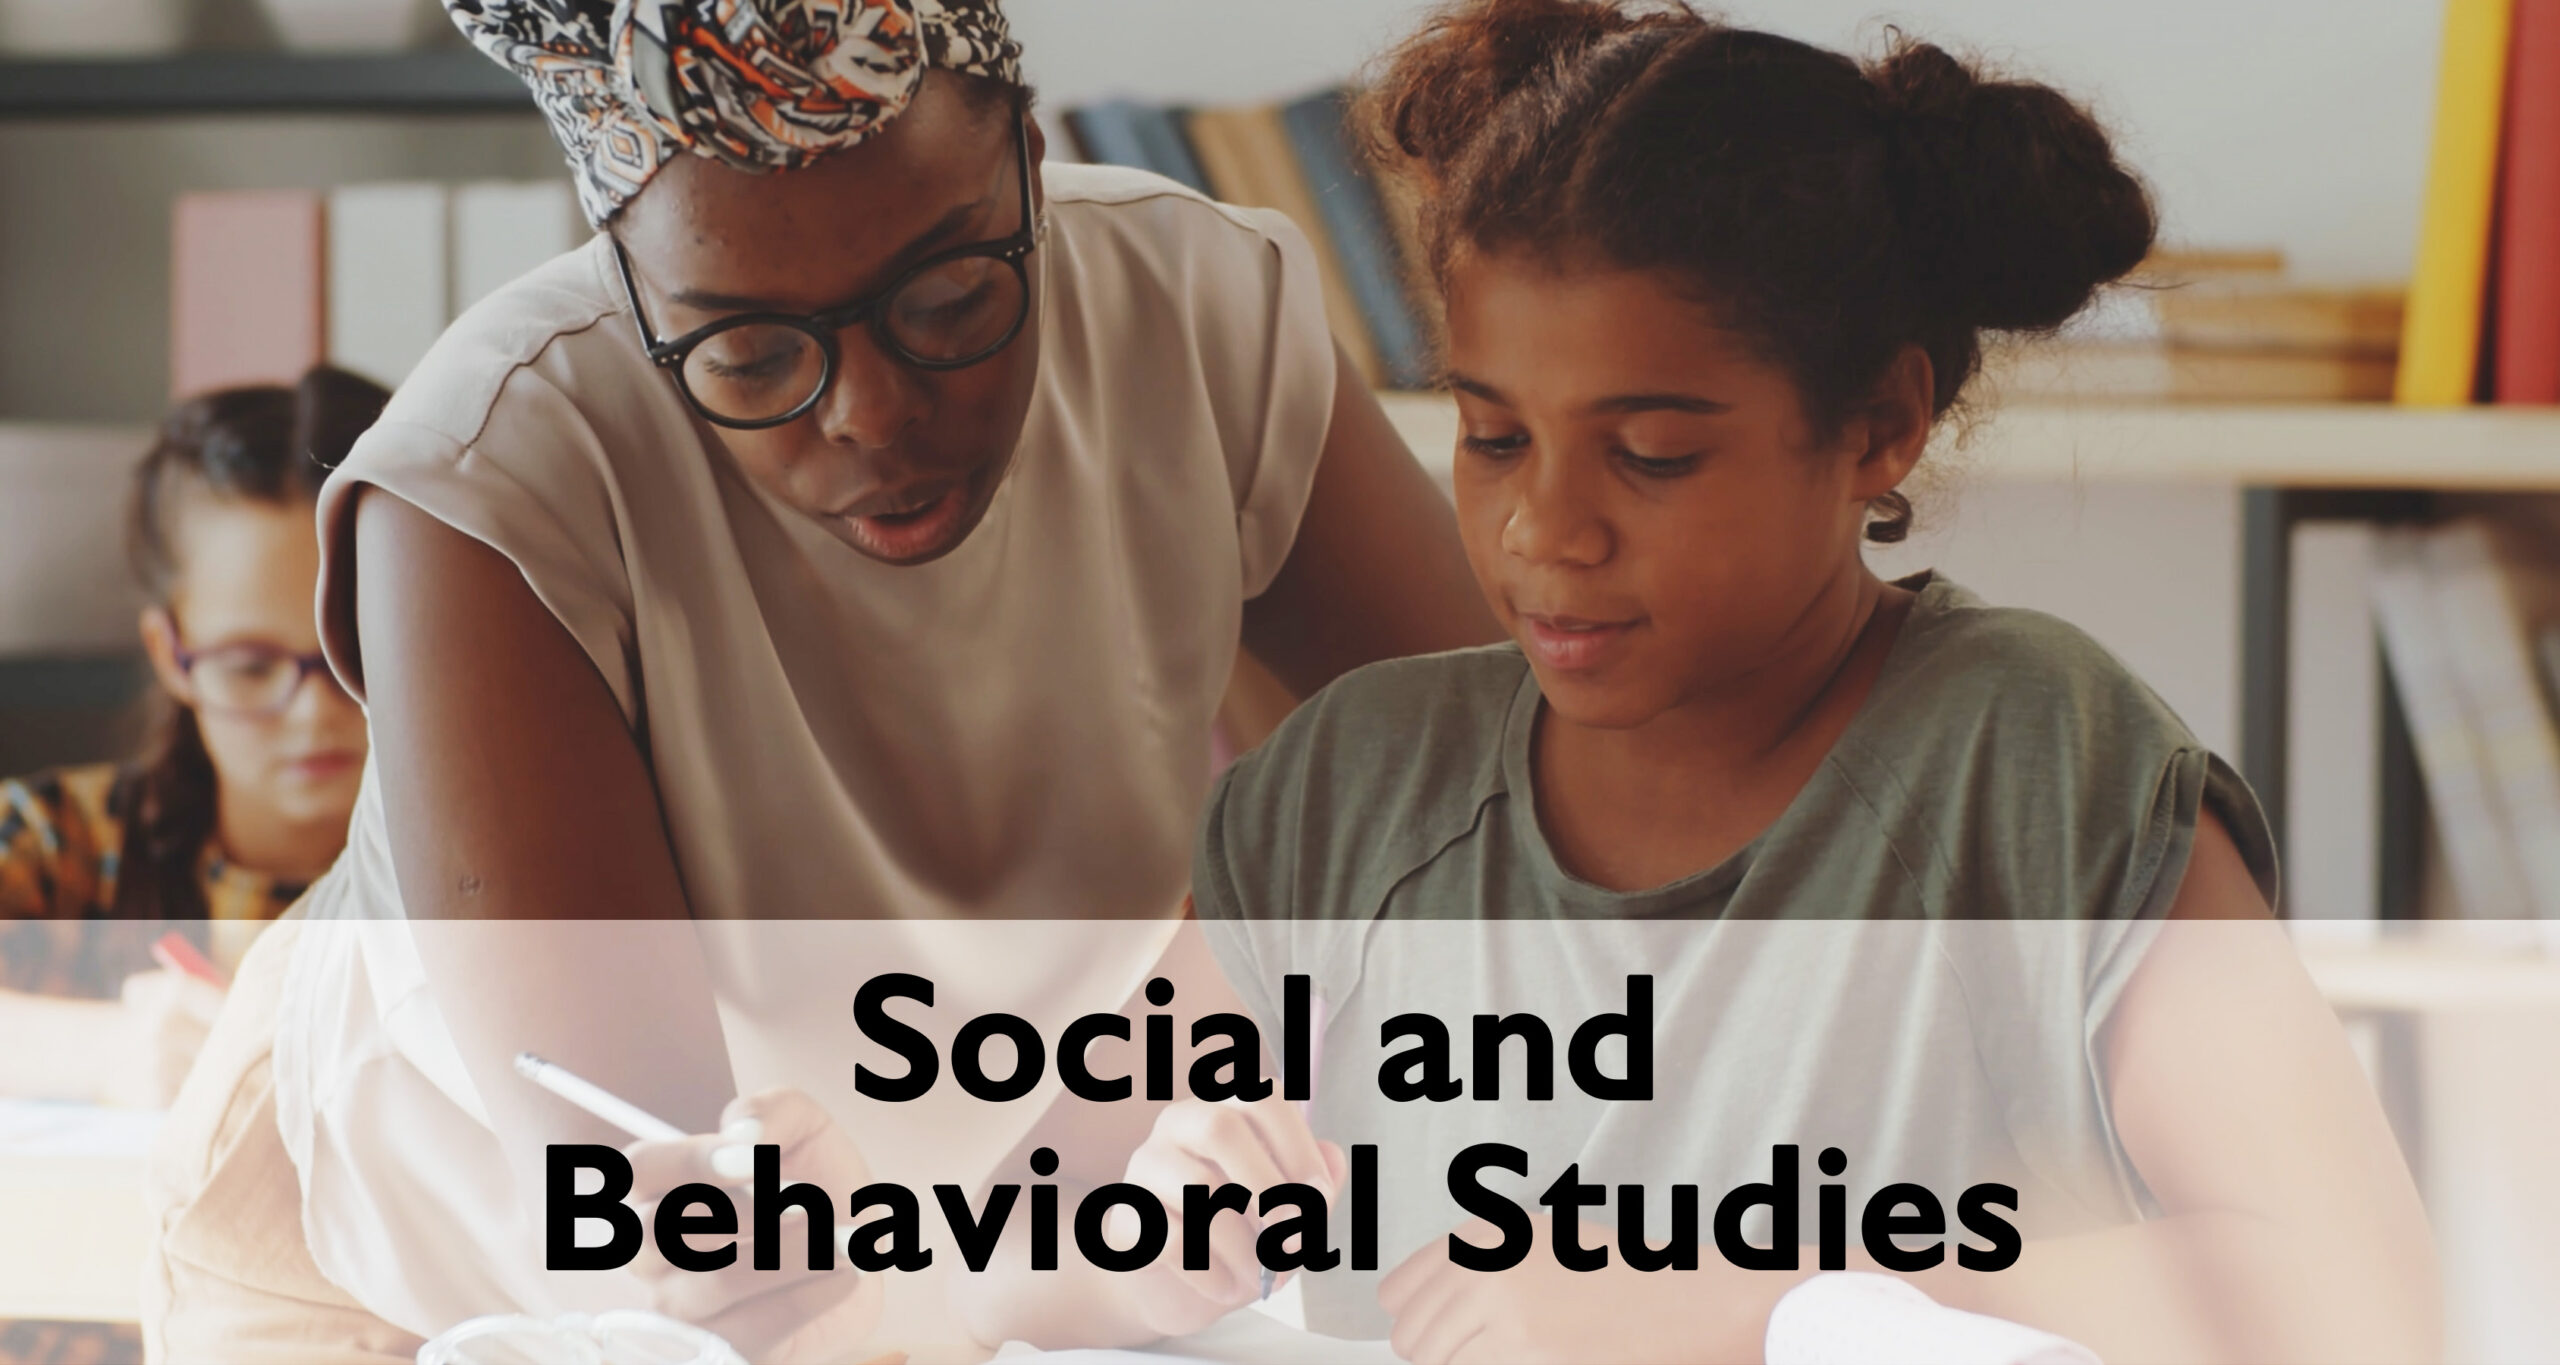 Click image to get to the Social and Behavioral pathway web page.